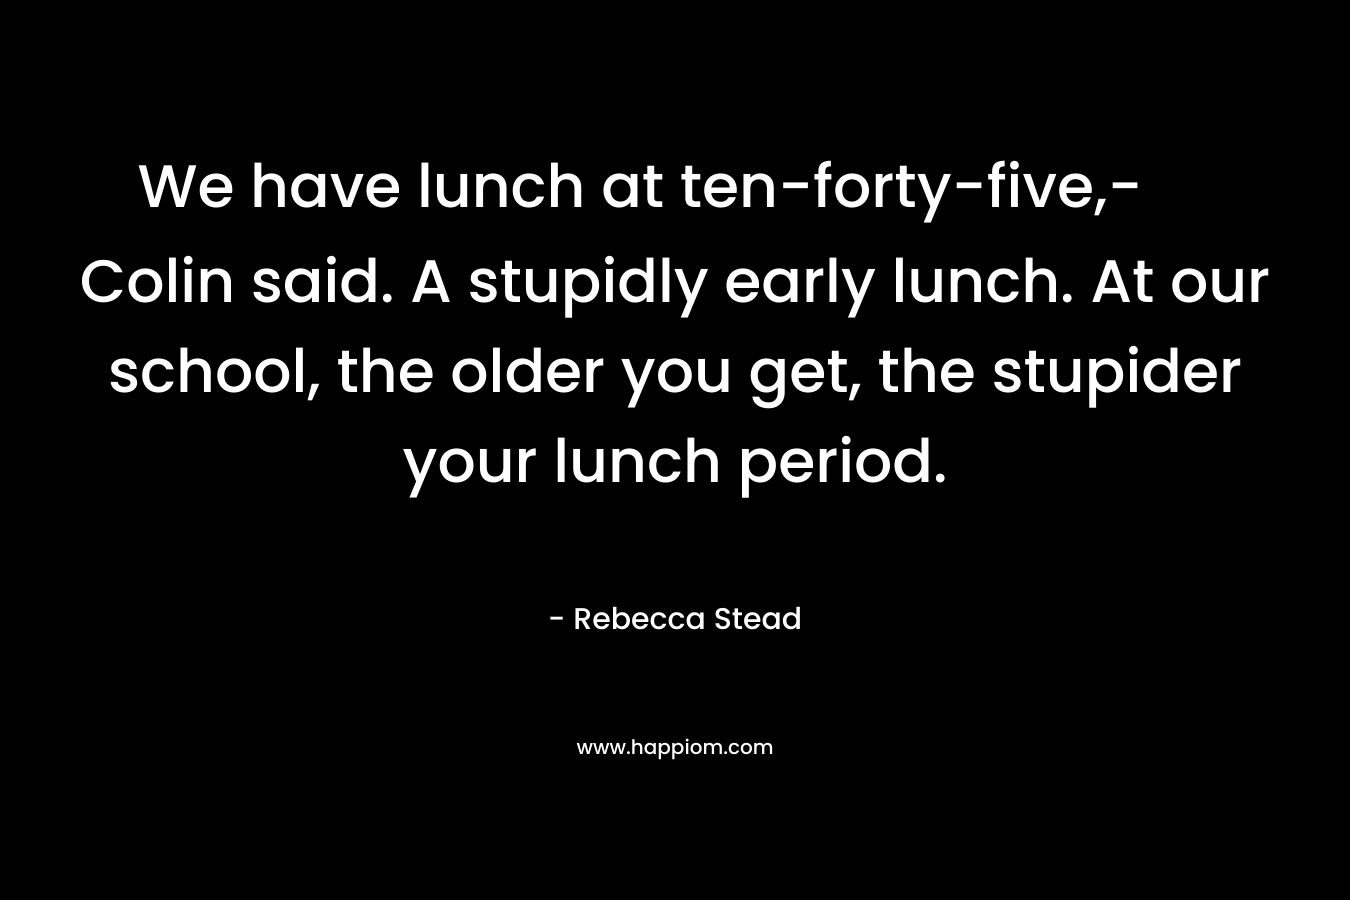 We have lunch at ten-forty-five,- Colin said. A stupidly early lunch. At our school, the older you get, the stupider your lunch period.